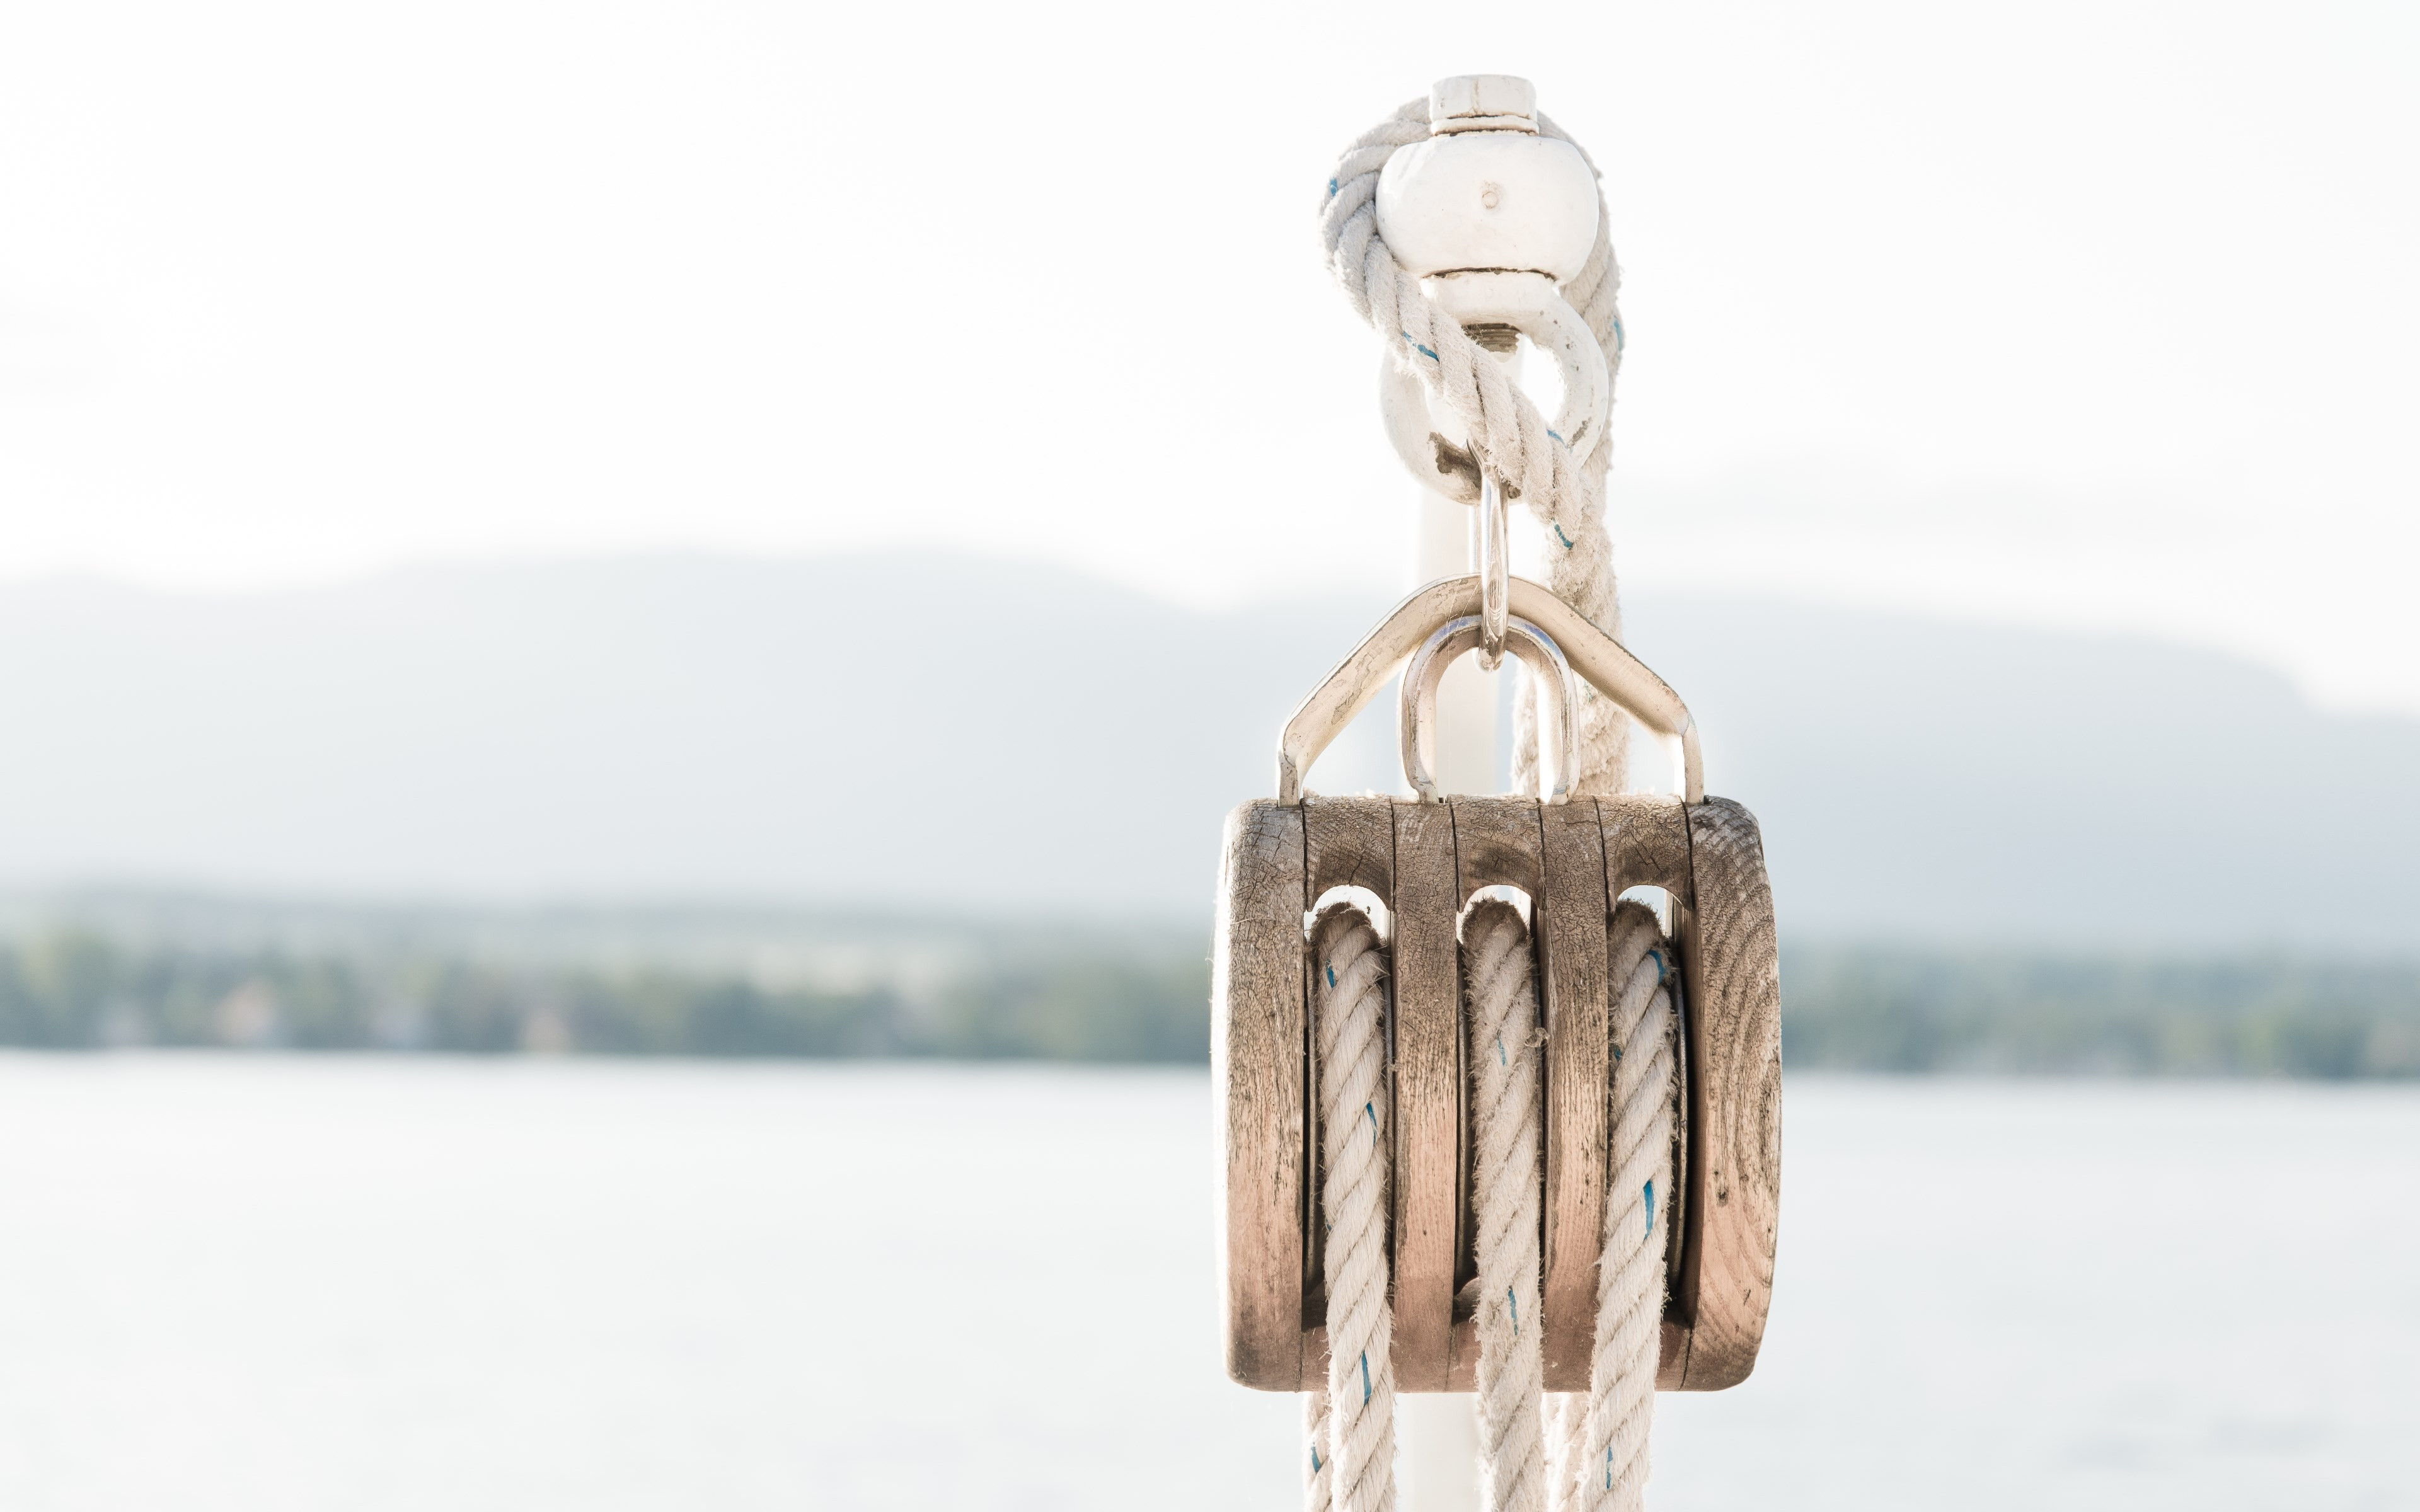 Pulley on a boat wallpaper 3840x2400